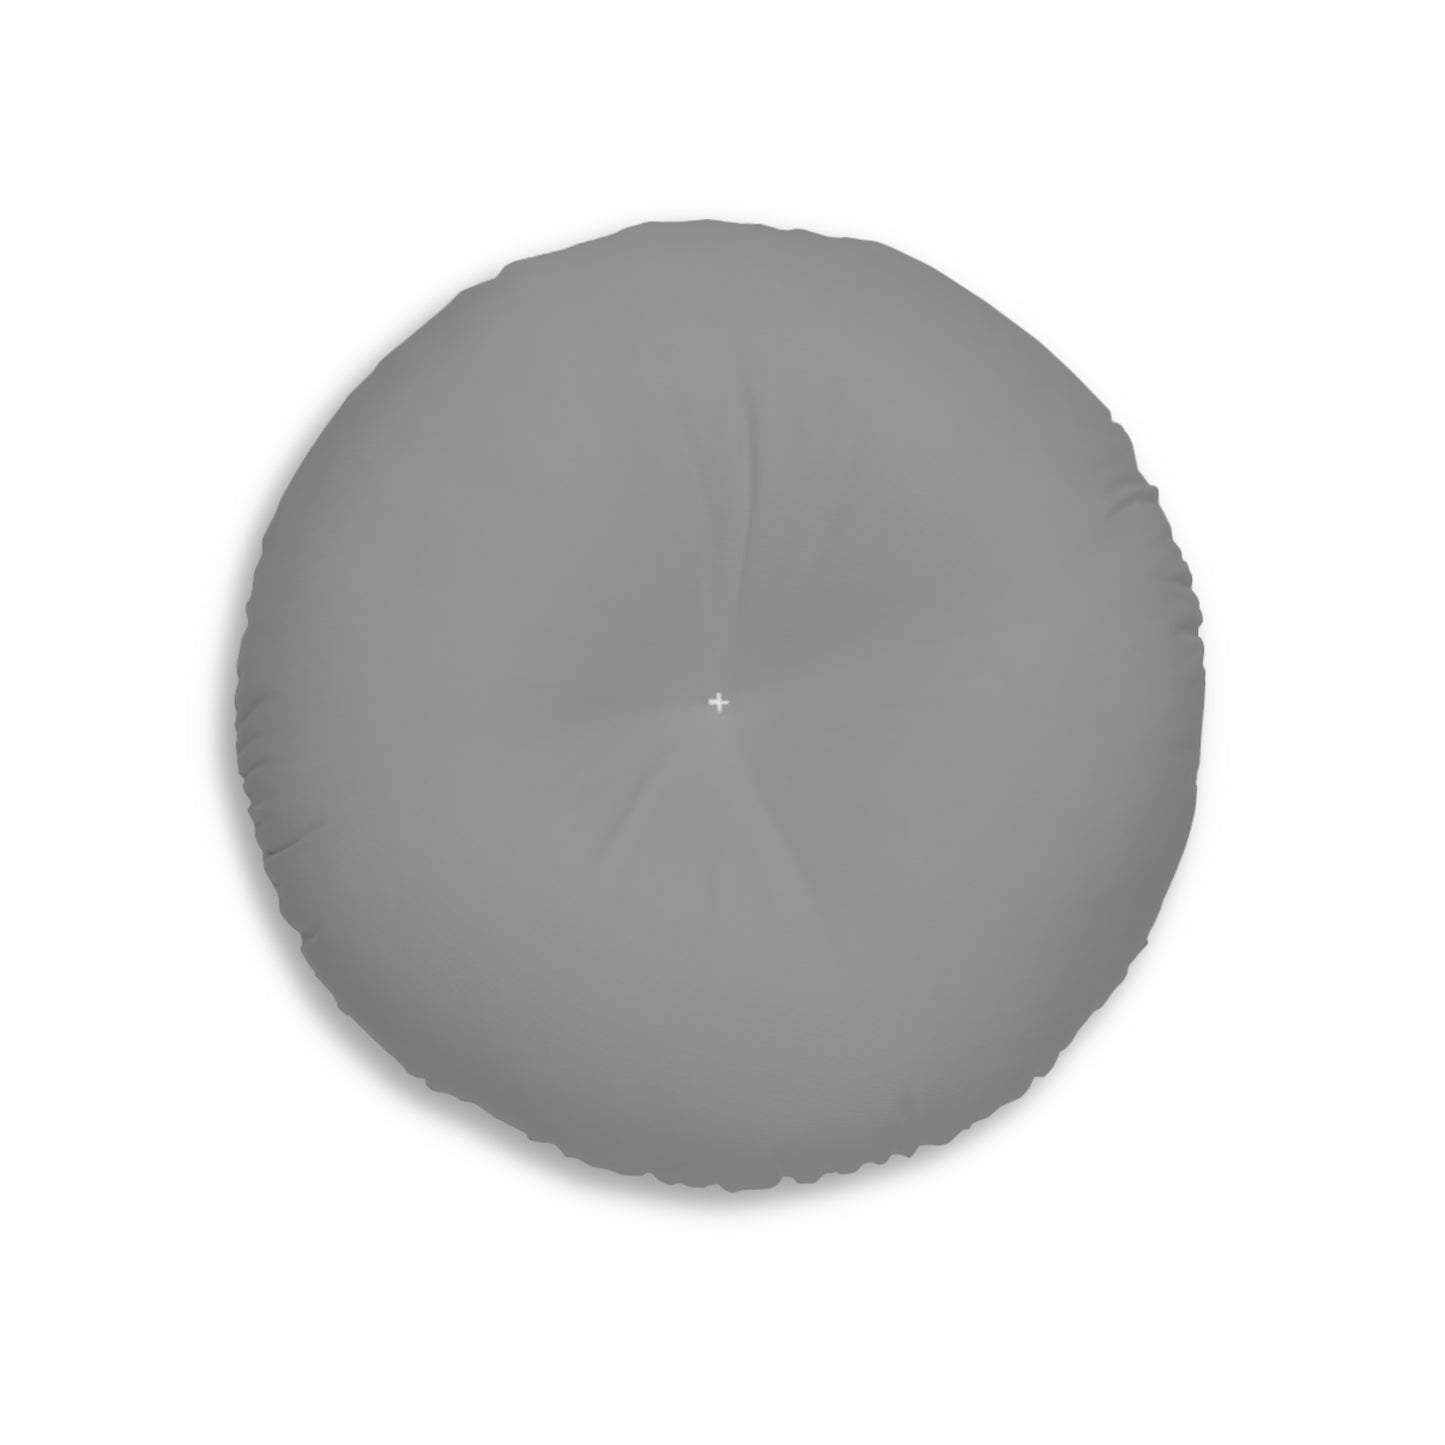 HPOS10I Round Tufted Floor Pillow - LIMITED EDITION